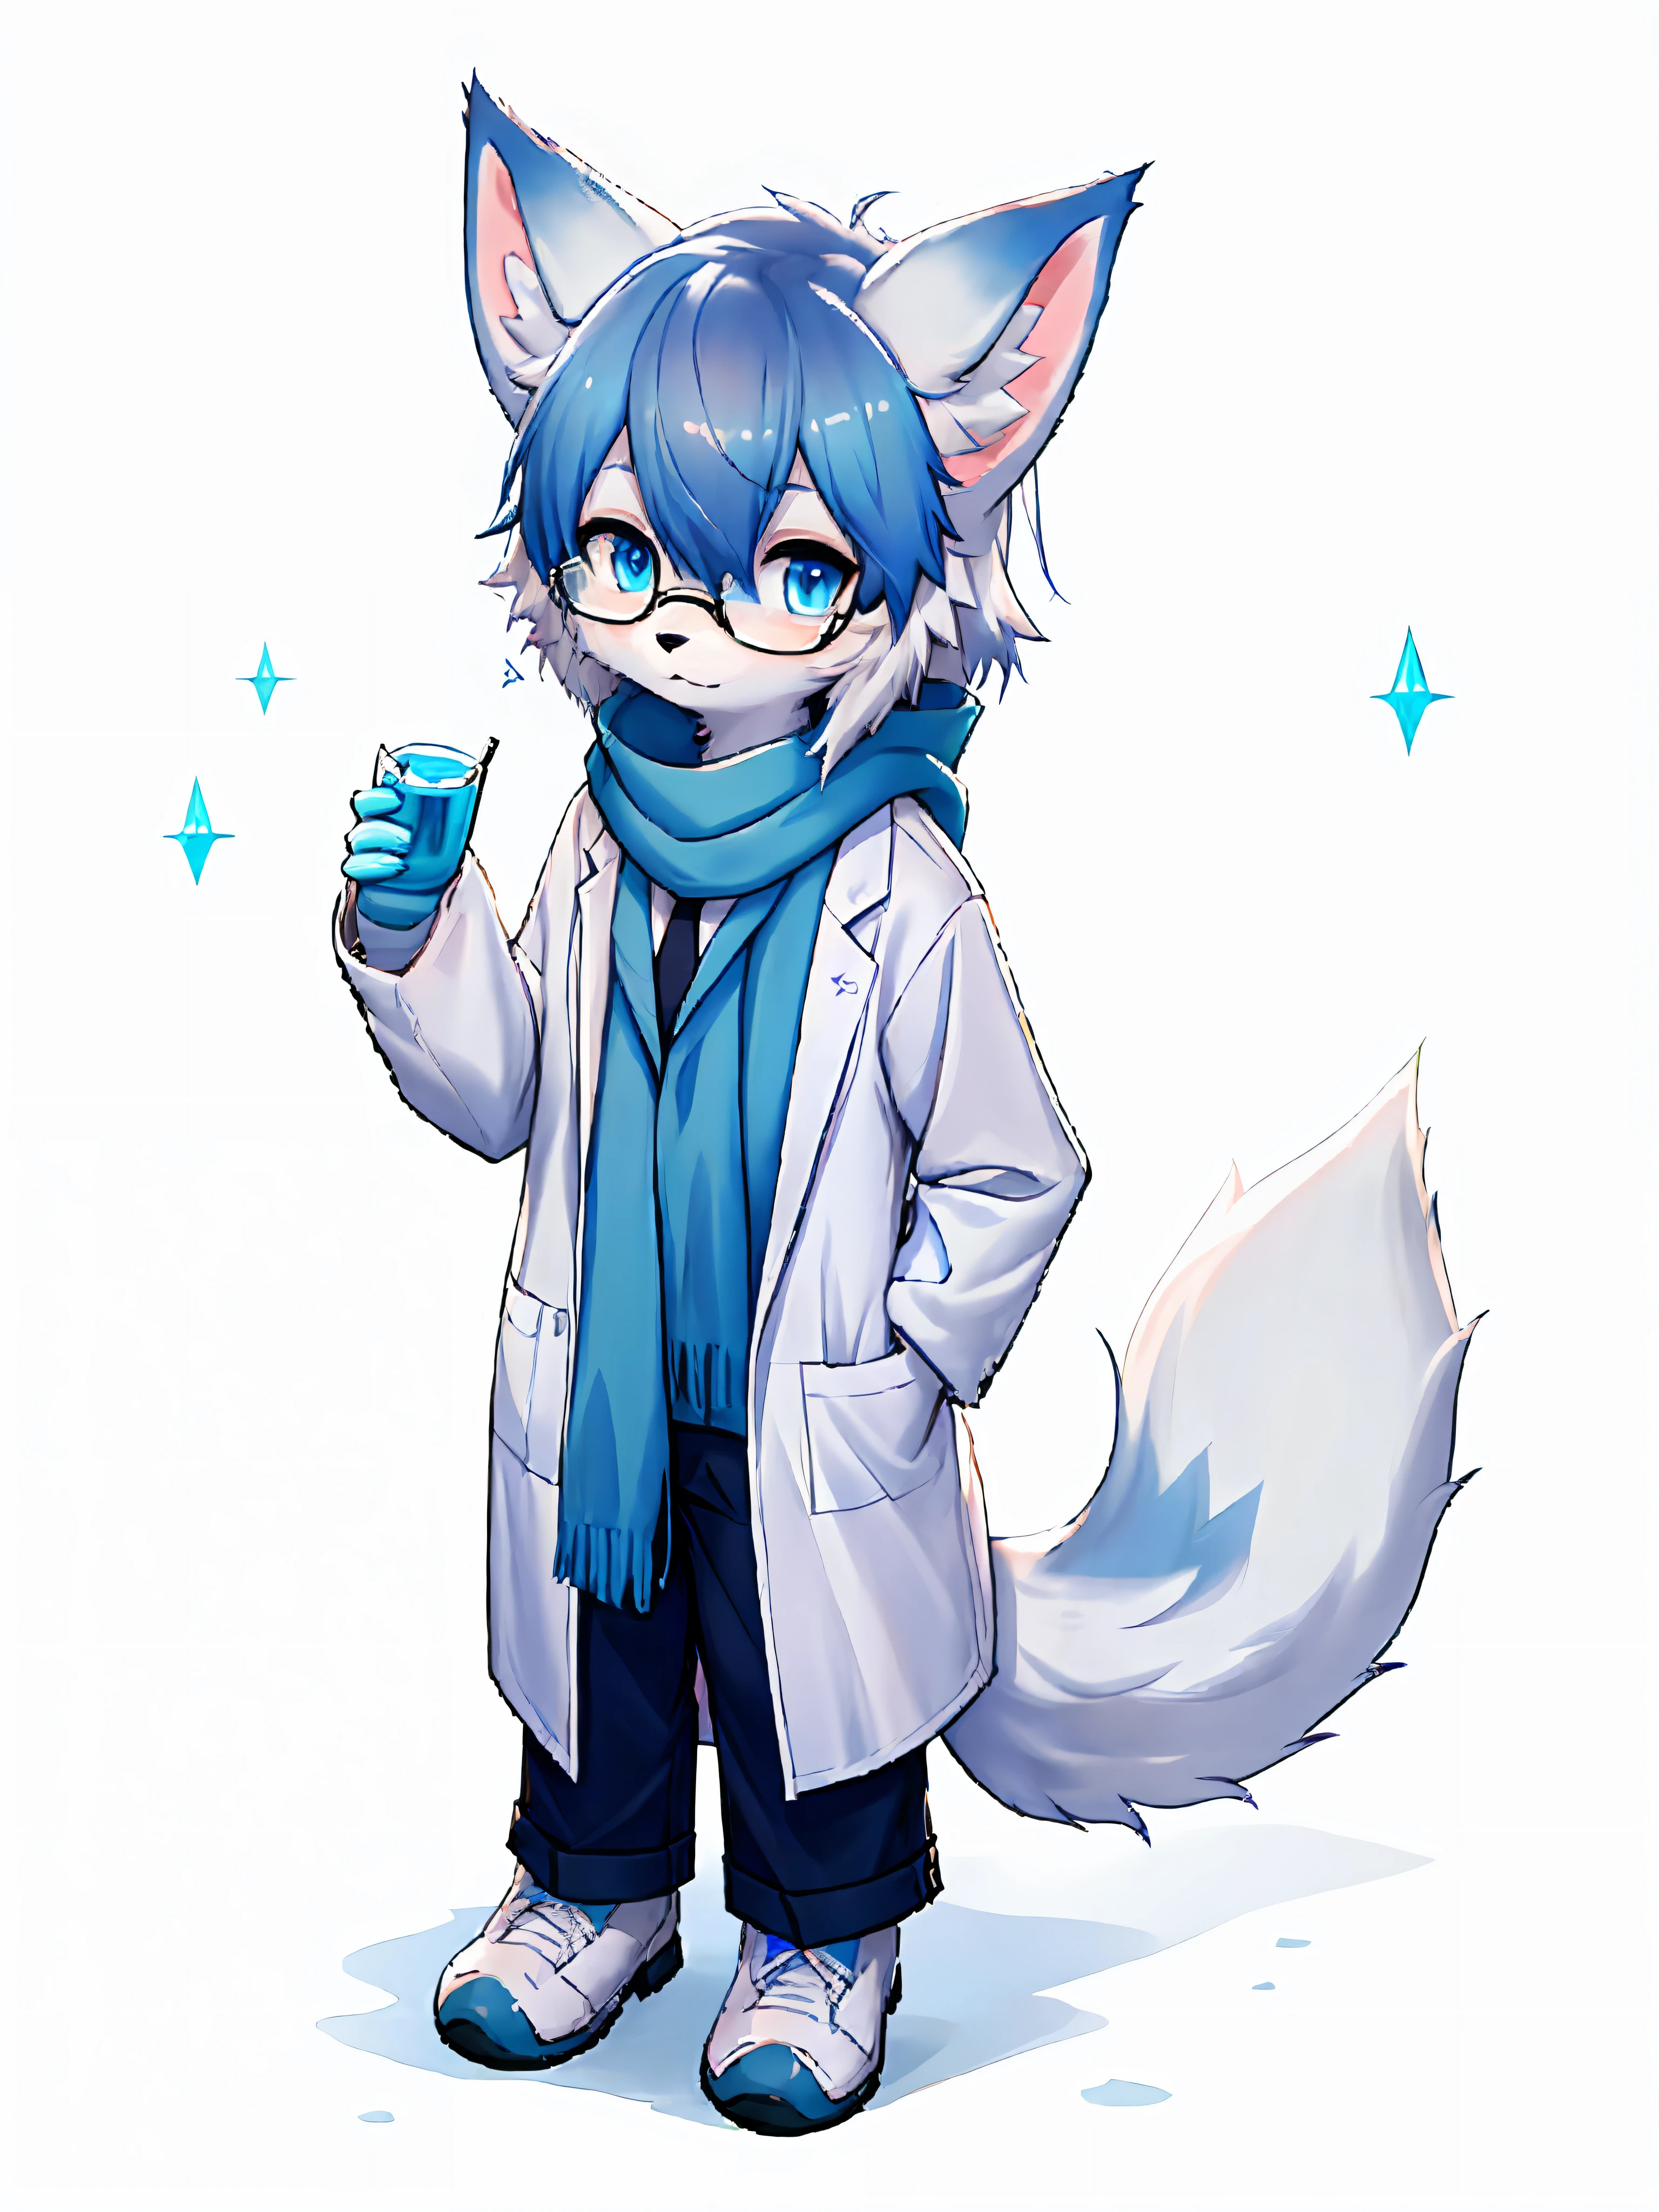 Anime character with arctic fox ears wearing lab coat and blue scarf,Arctic fox with fluffy blue fur and tail,Wear half-rimmed glasses,Arctic fox beauty in lab coat,  Fox scientist, professional furry drawing